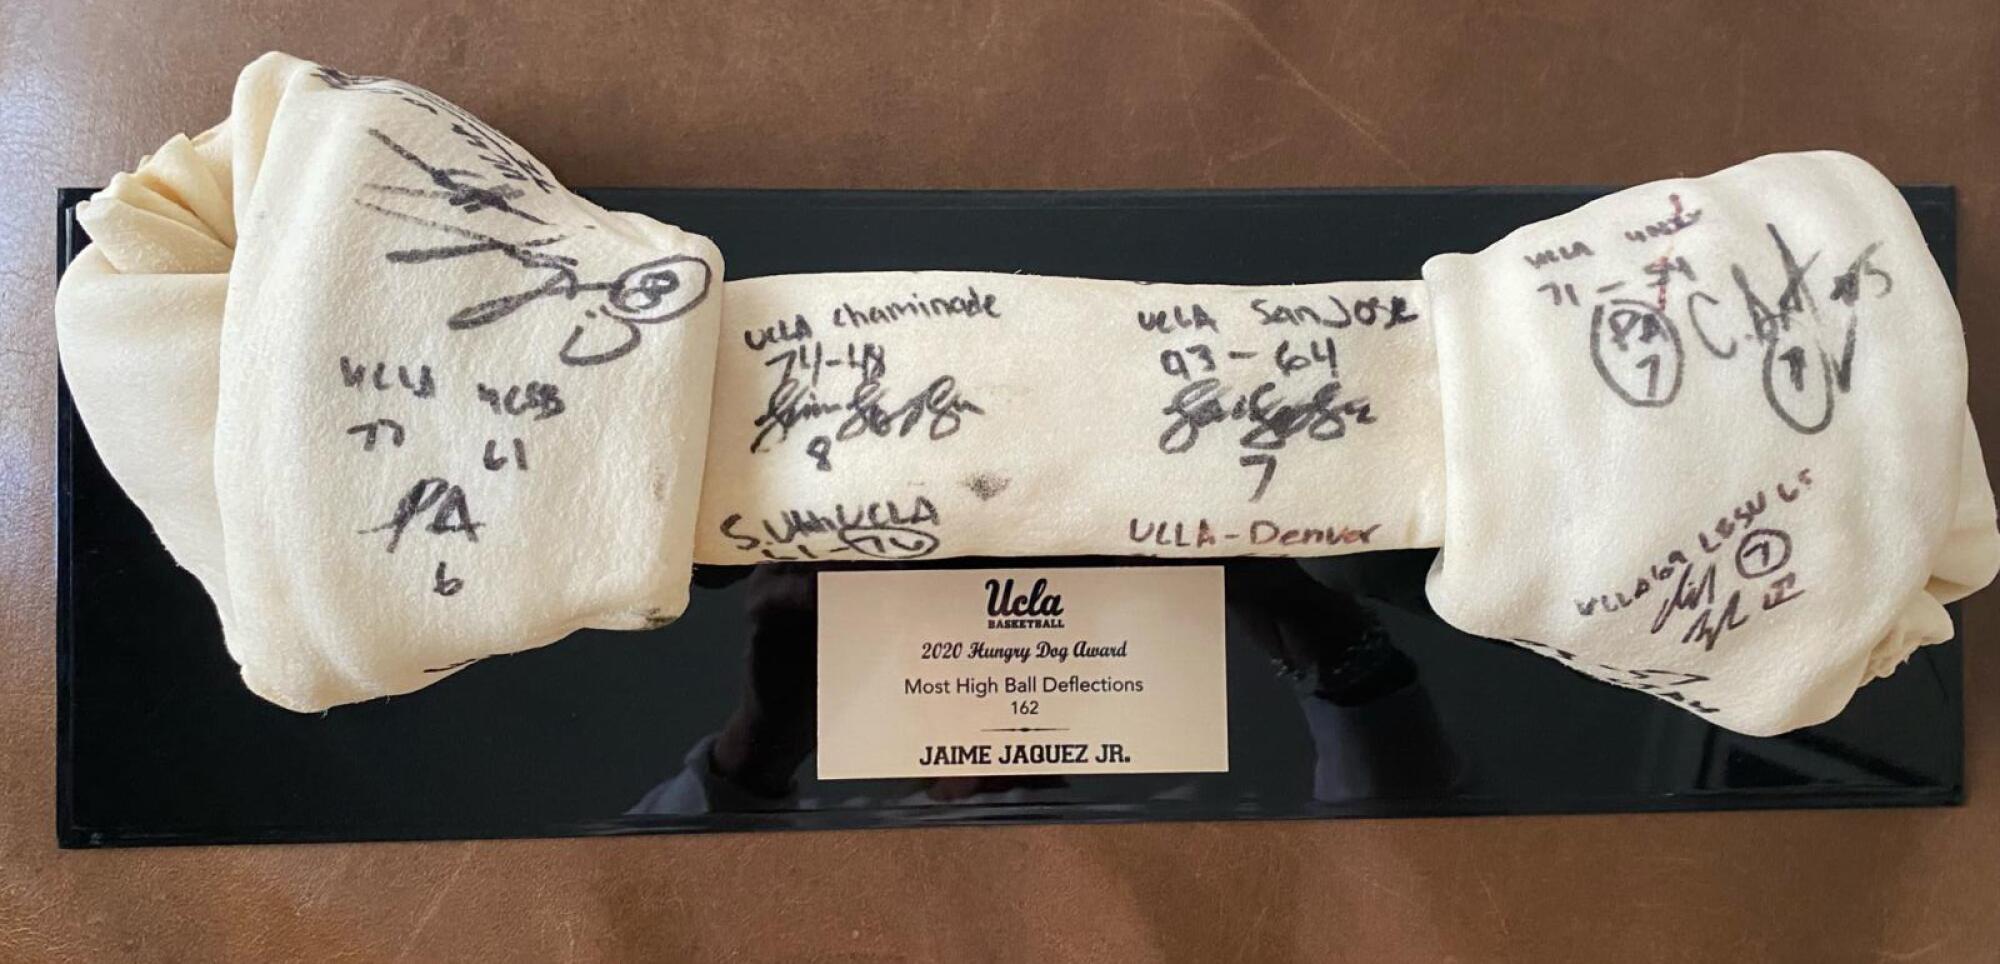 The Hungry Dog Award won by UCLA's Jaime Jaquez Jr. in 2020.